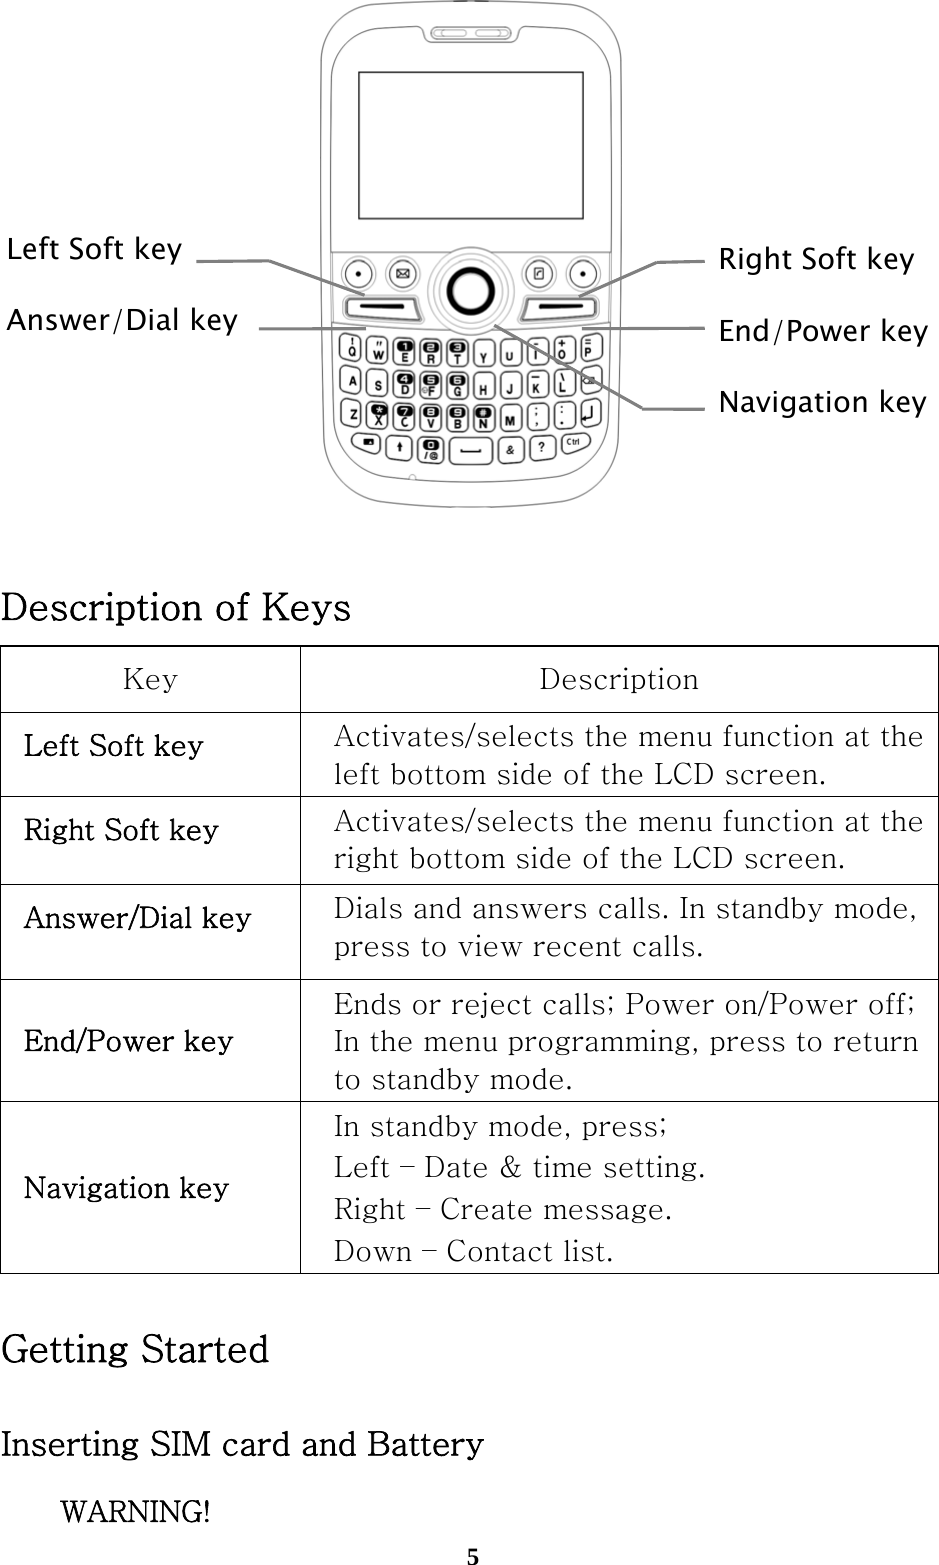  5  Description of Keys Key  Description Left Soft key  Activates/selects the menu function at the left bottom side of the LCD screen. Right Soft key Activates/selects the menu function at the right bottom side of the LCD screen. Answer/Dial key Dials and answers calls. In standby mode, press to view recent calls. End/Power key Ends or reject calls; Power on/Power off; In the menu programming, press to return to standby mode. Navigation key In standby mode, press; Left – Date &amp; time setting. Right – Create message. Down – Contact list. Getting Started Inserting SIM card and Battery WARNING! Left Soft key Answer/Dial key Right Soft keyEnd/Power keyNavigation key